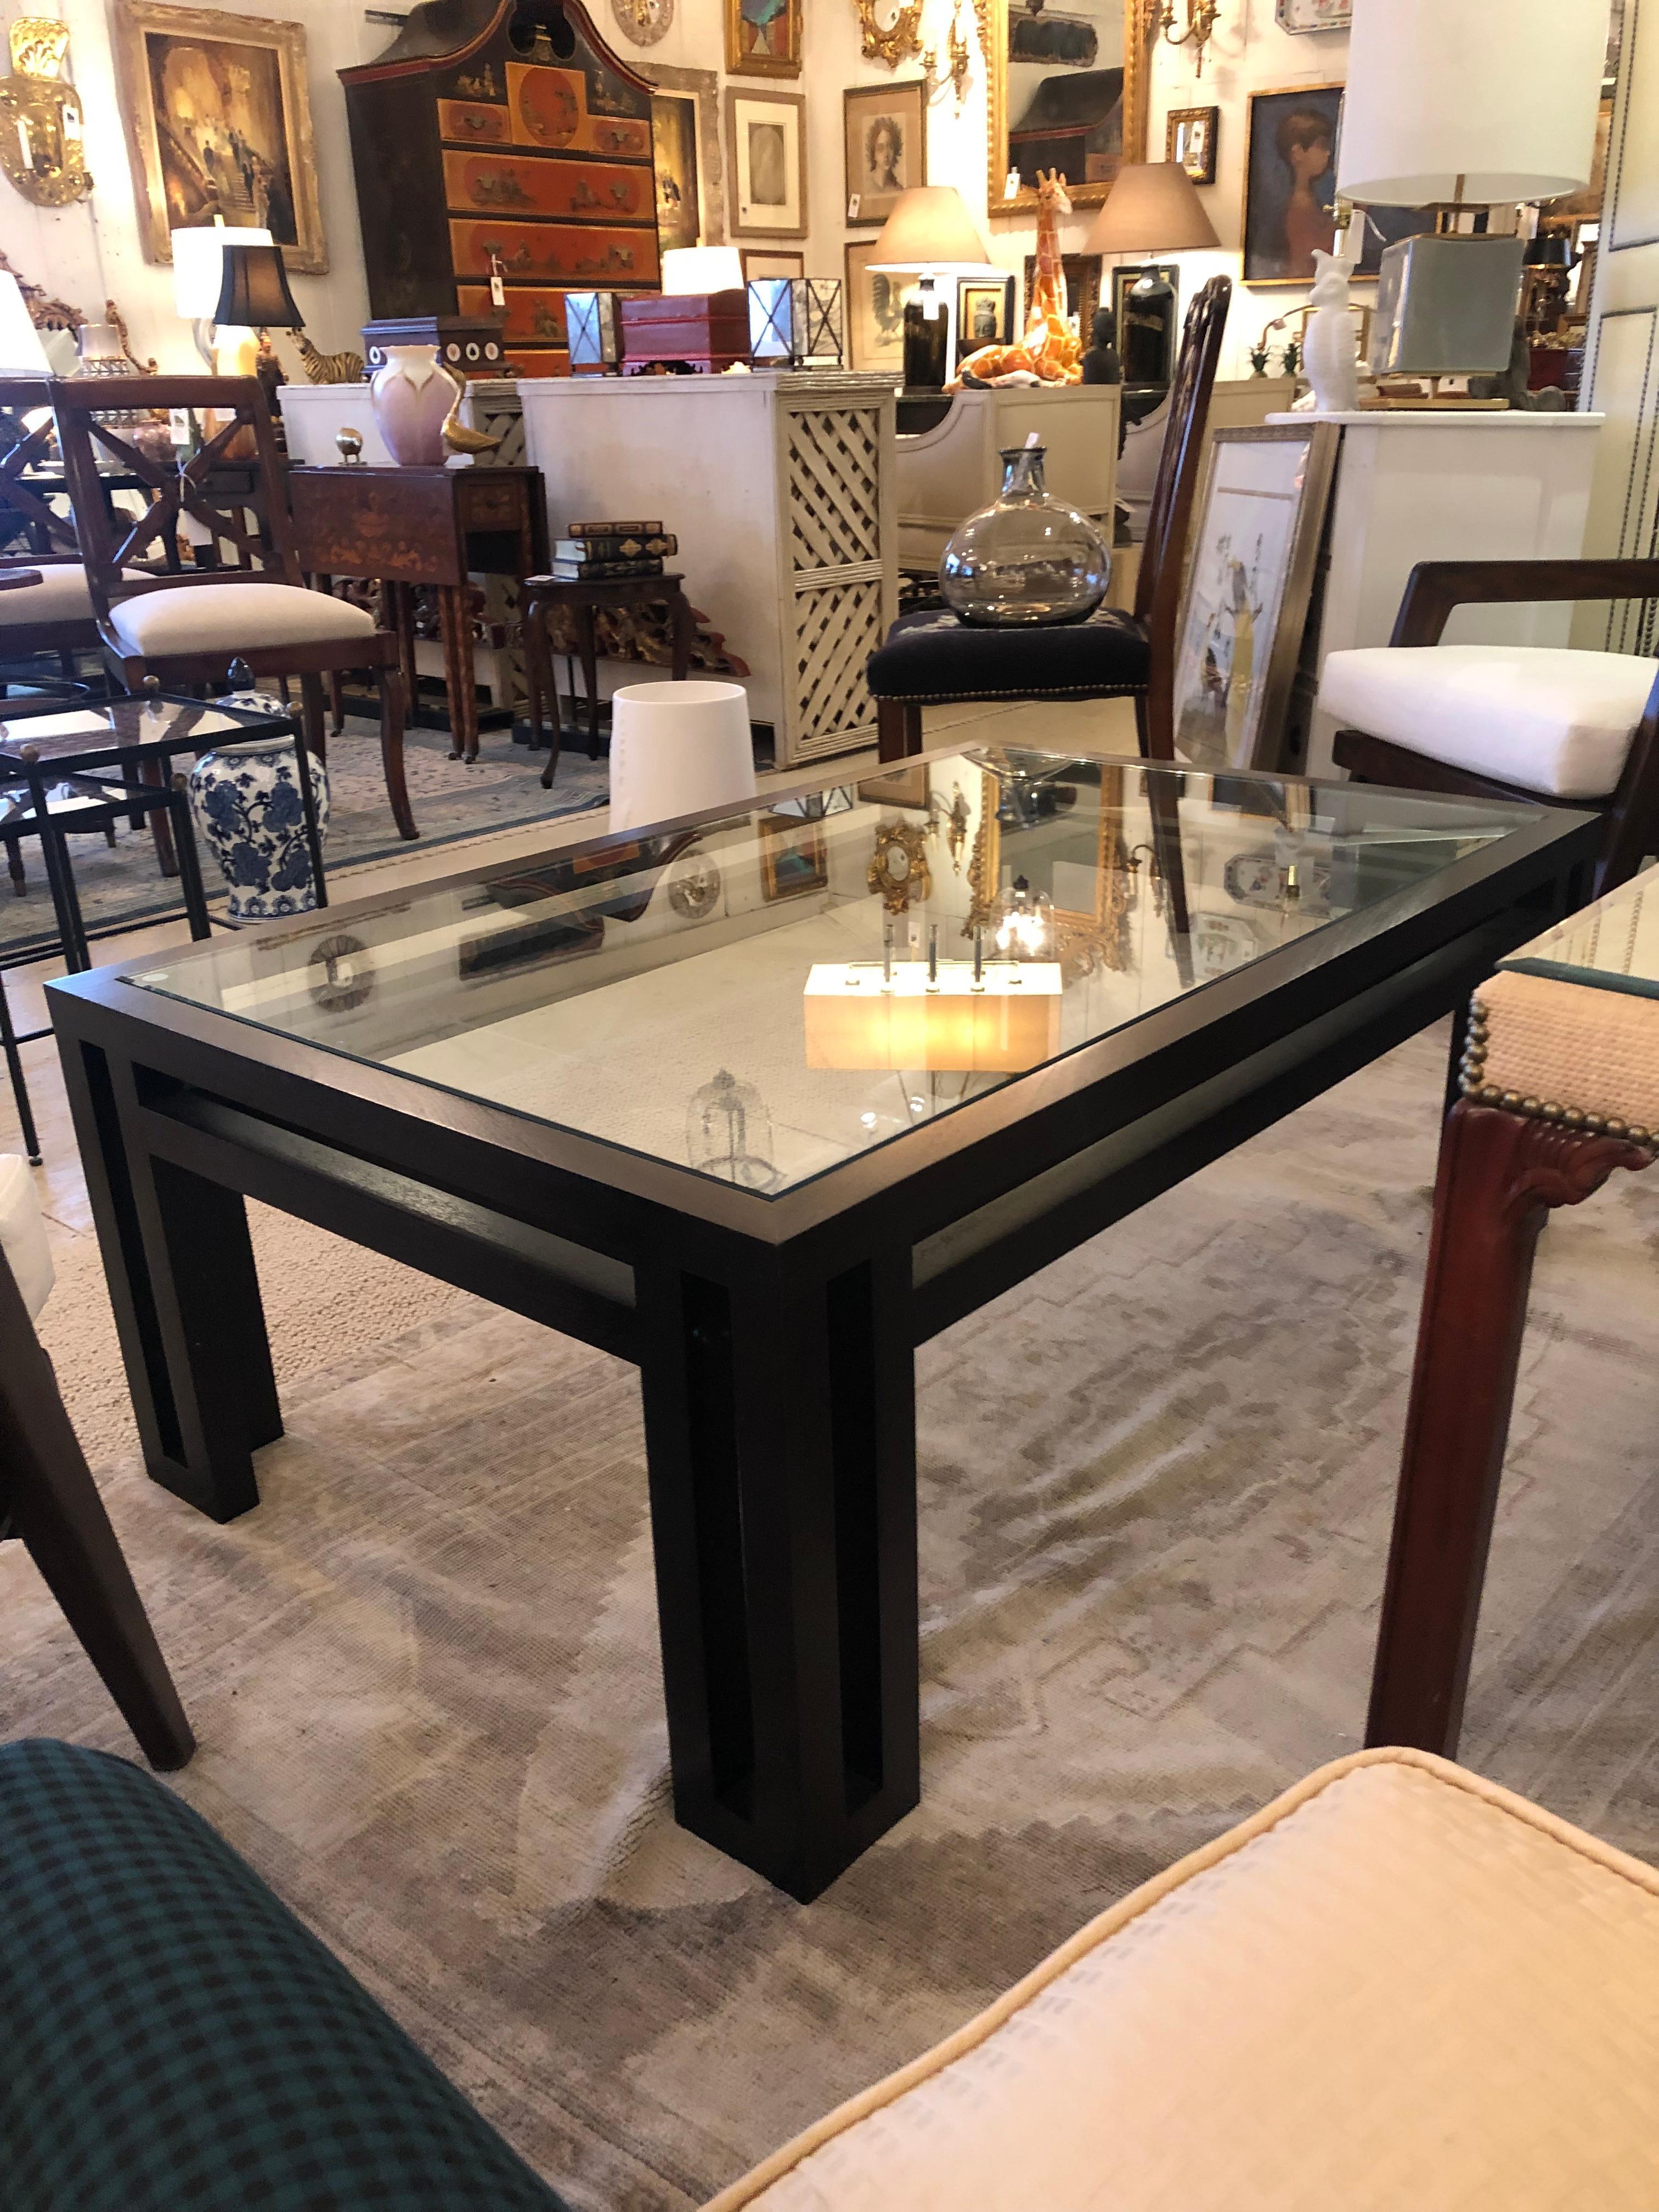 Super chic iconic designed ebonized wood and glass coffee table from the Billy Baldwin Collection.